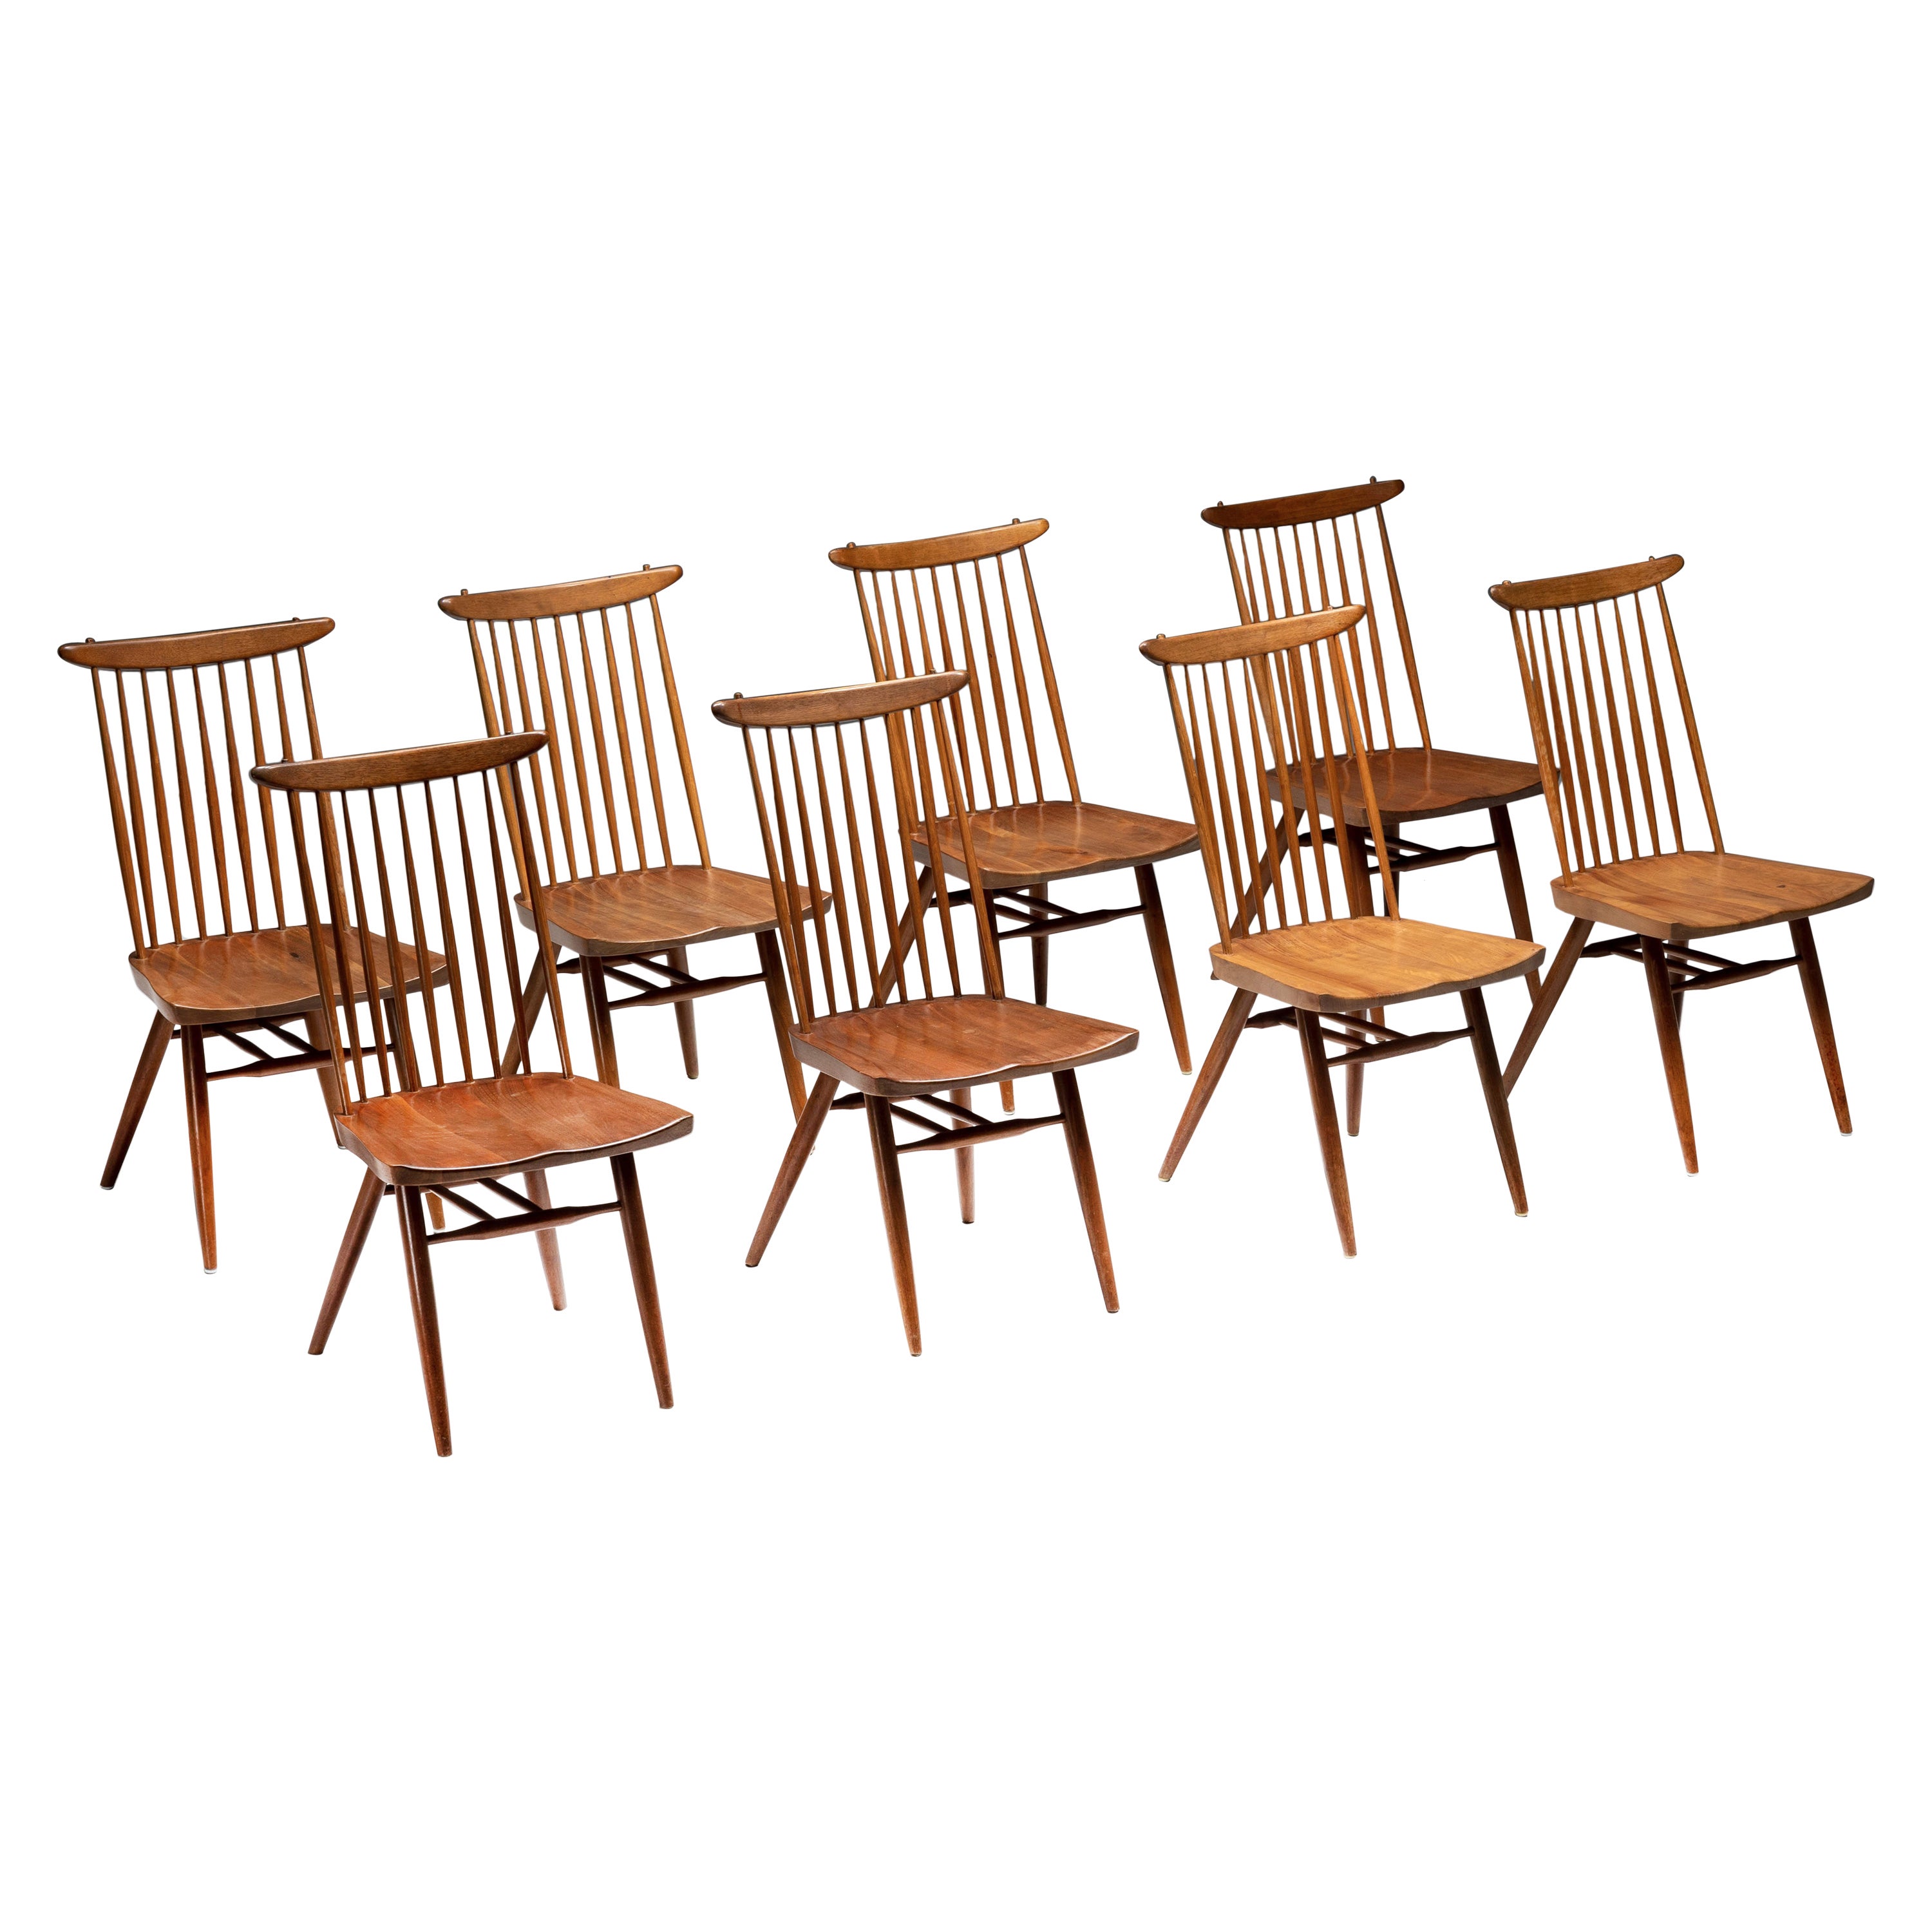 "New" Dining Chairs by George Nakashima, United States, 1950s